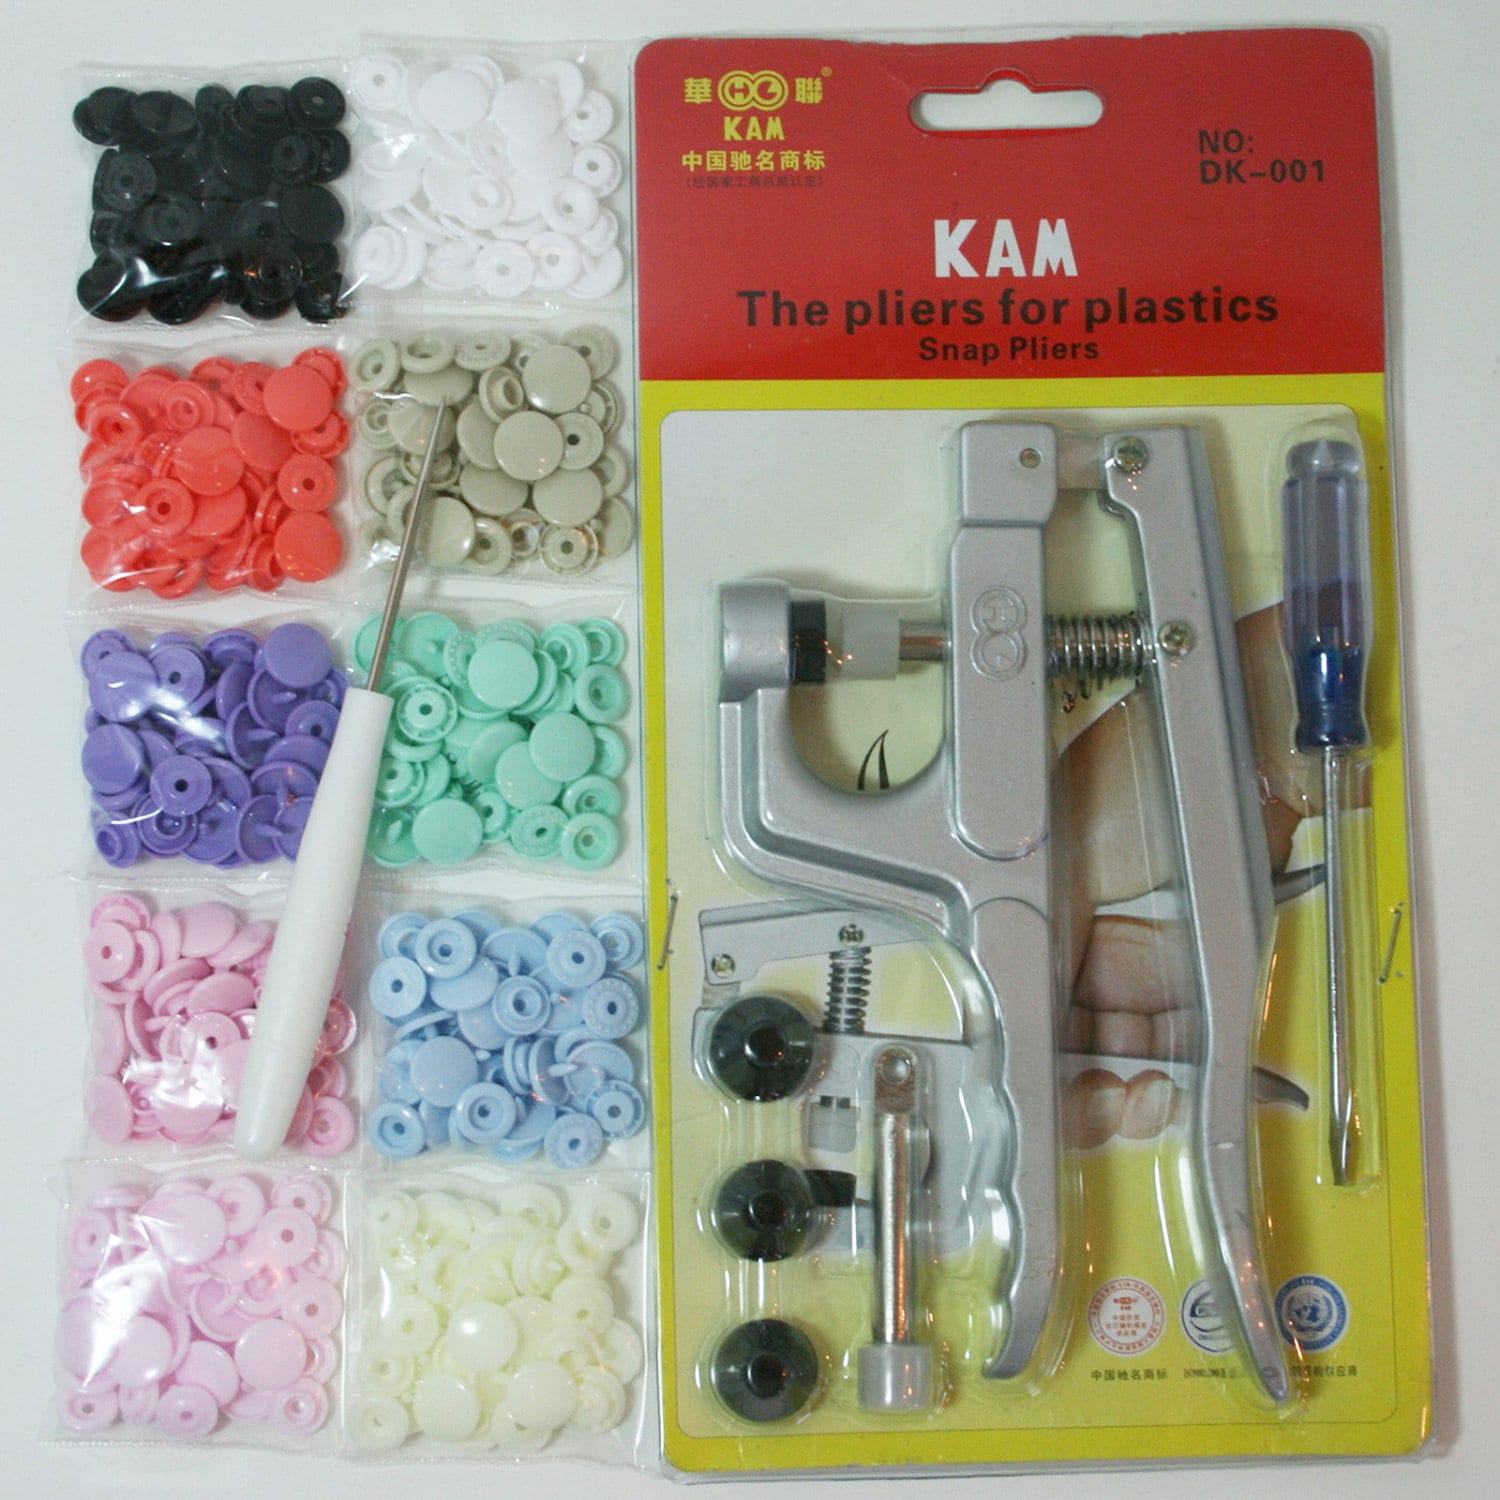 Bundle - 2 Items: Starter Pack KAM Plastic Snap Setting Pliers & Awl Set  with 100 Complete KAM Plastic Snap Sets for No Sew Fasteners/Cloth